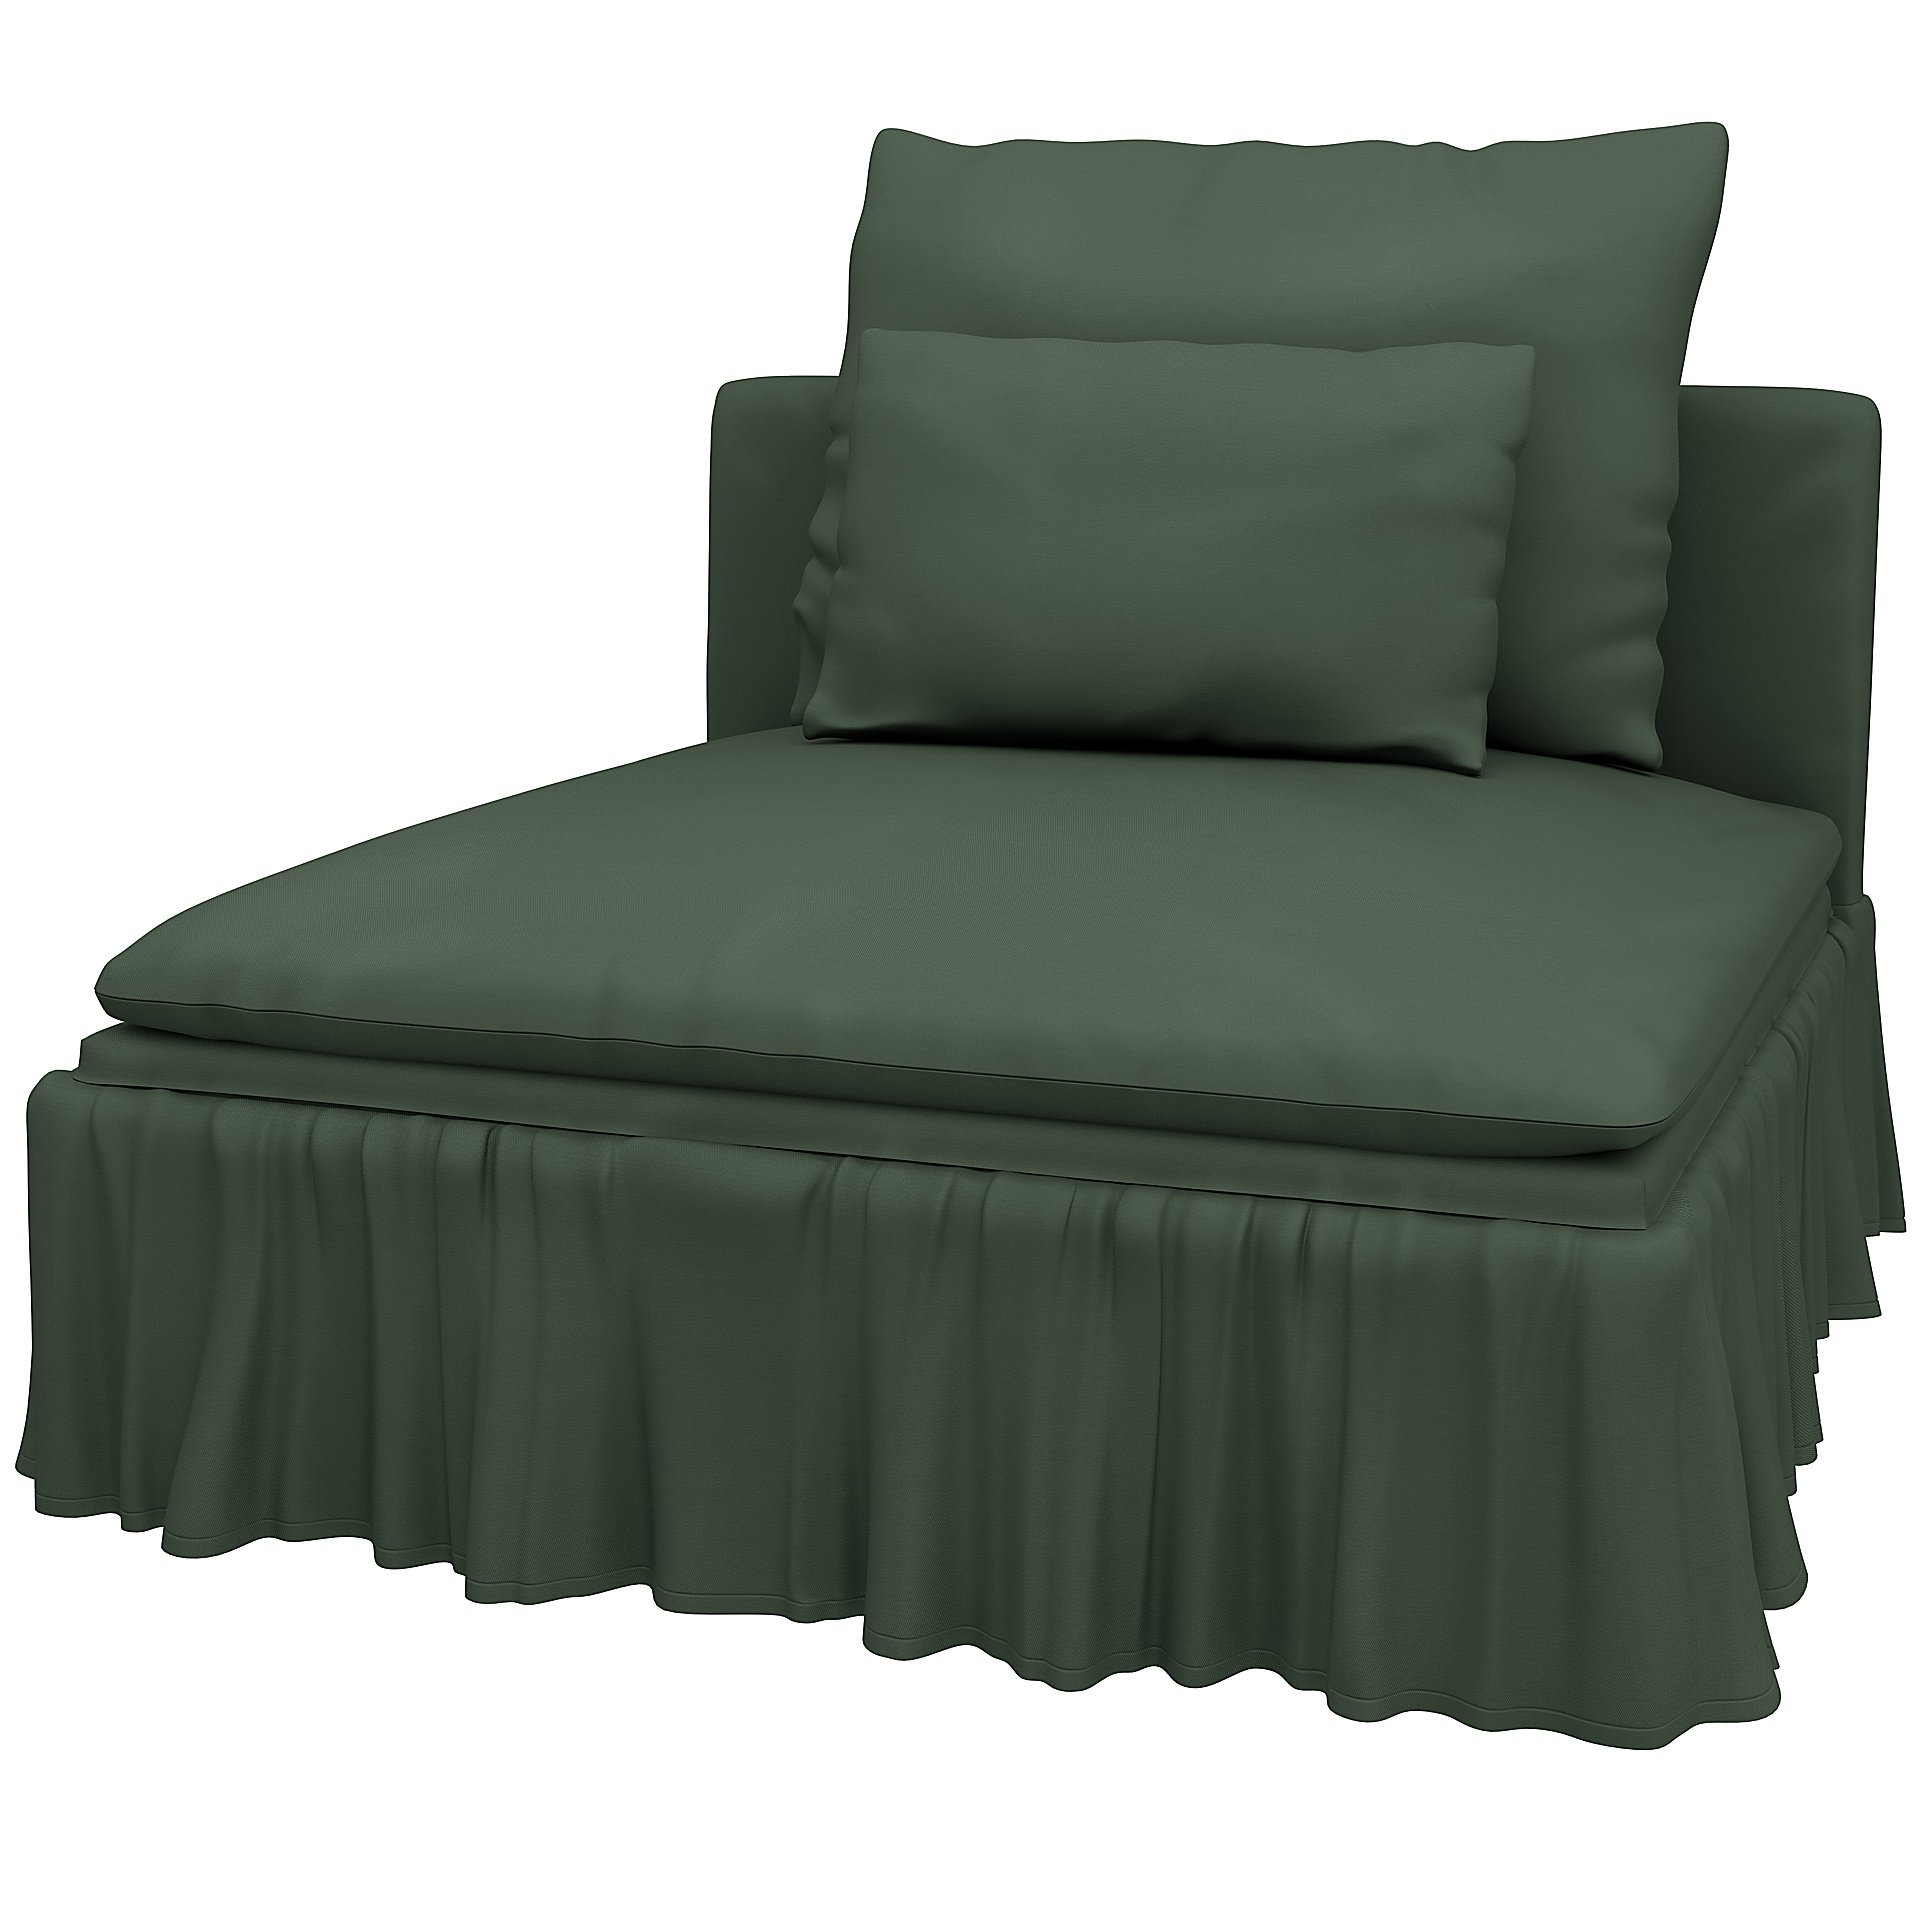 IKEA - Soderhamn 1 seat section cover Maximalist Fit, Thyme, Cotton - Bemz